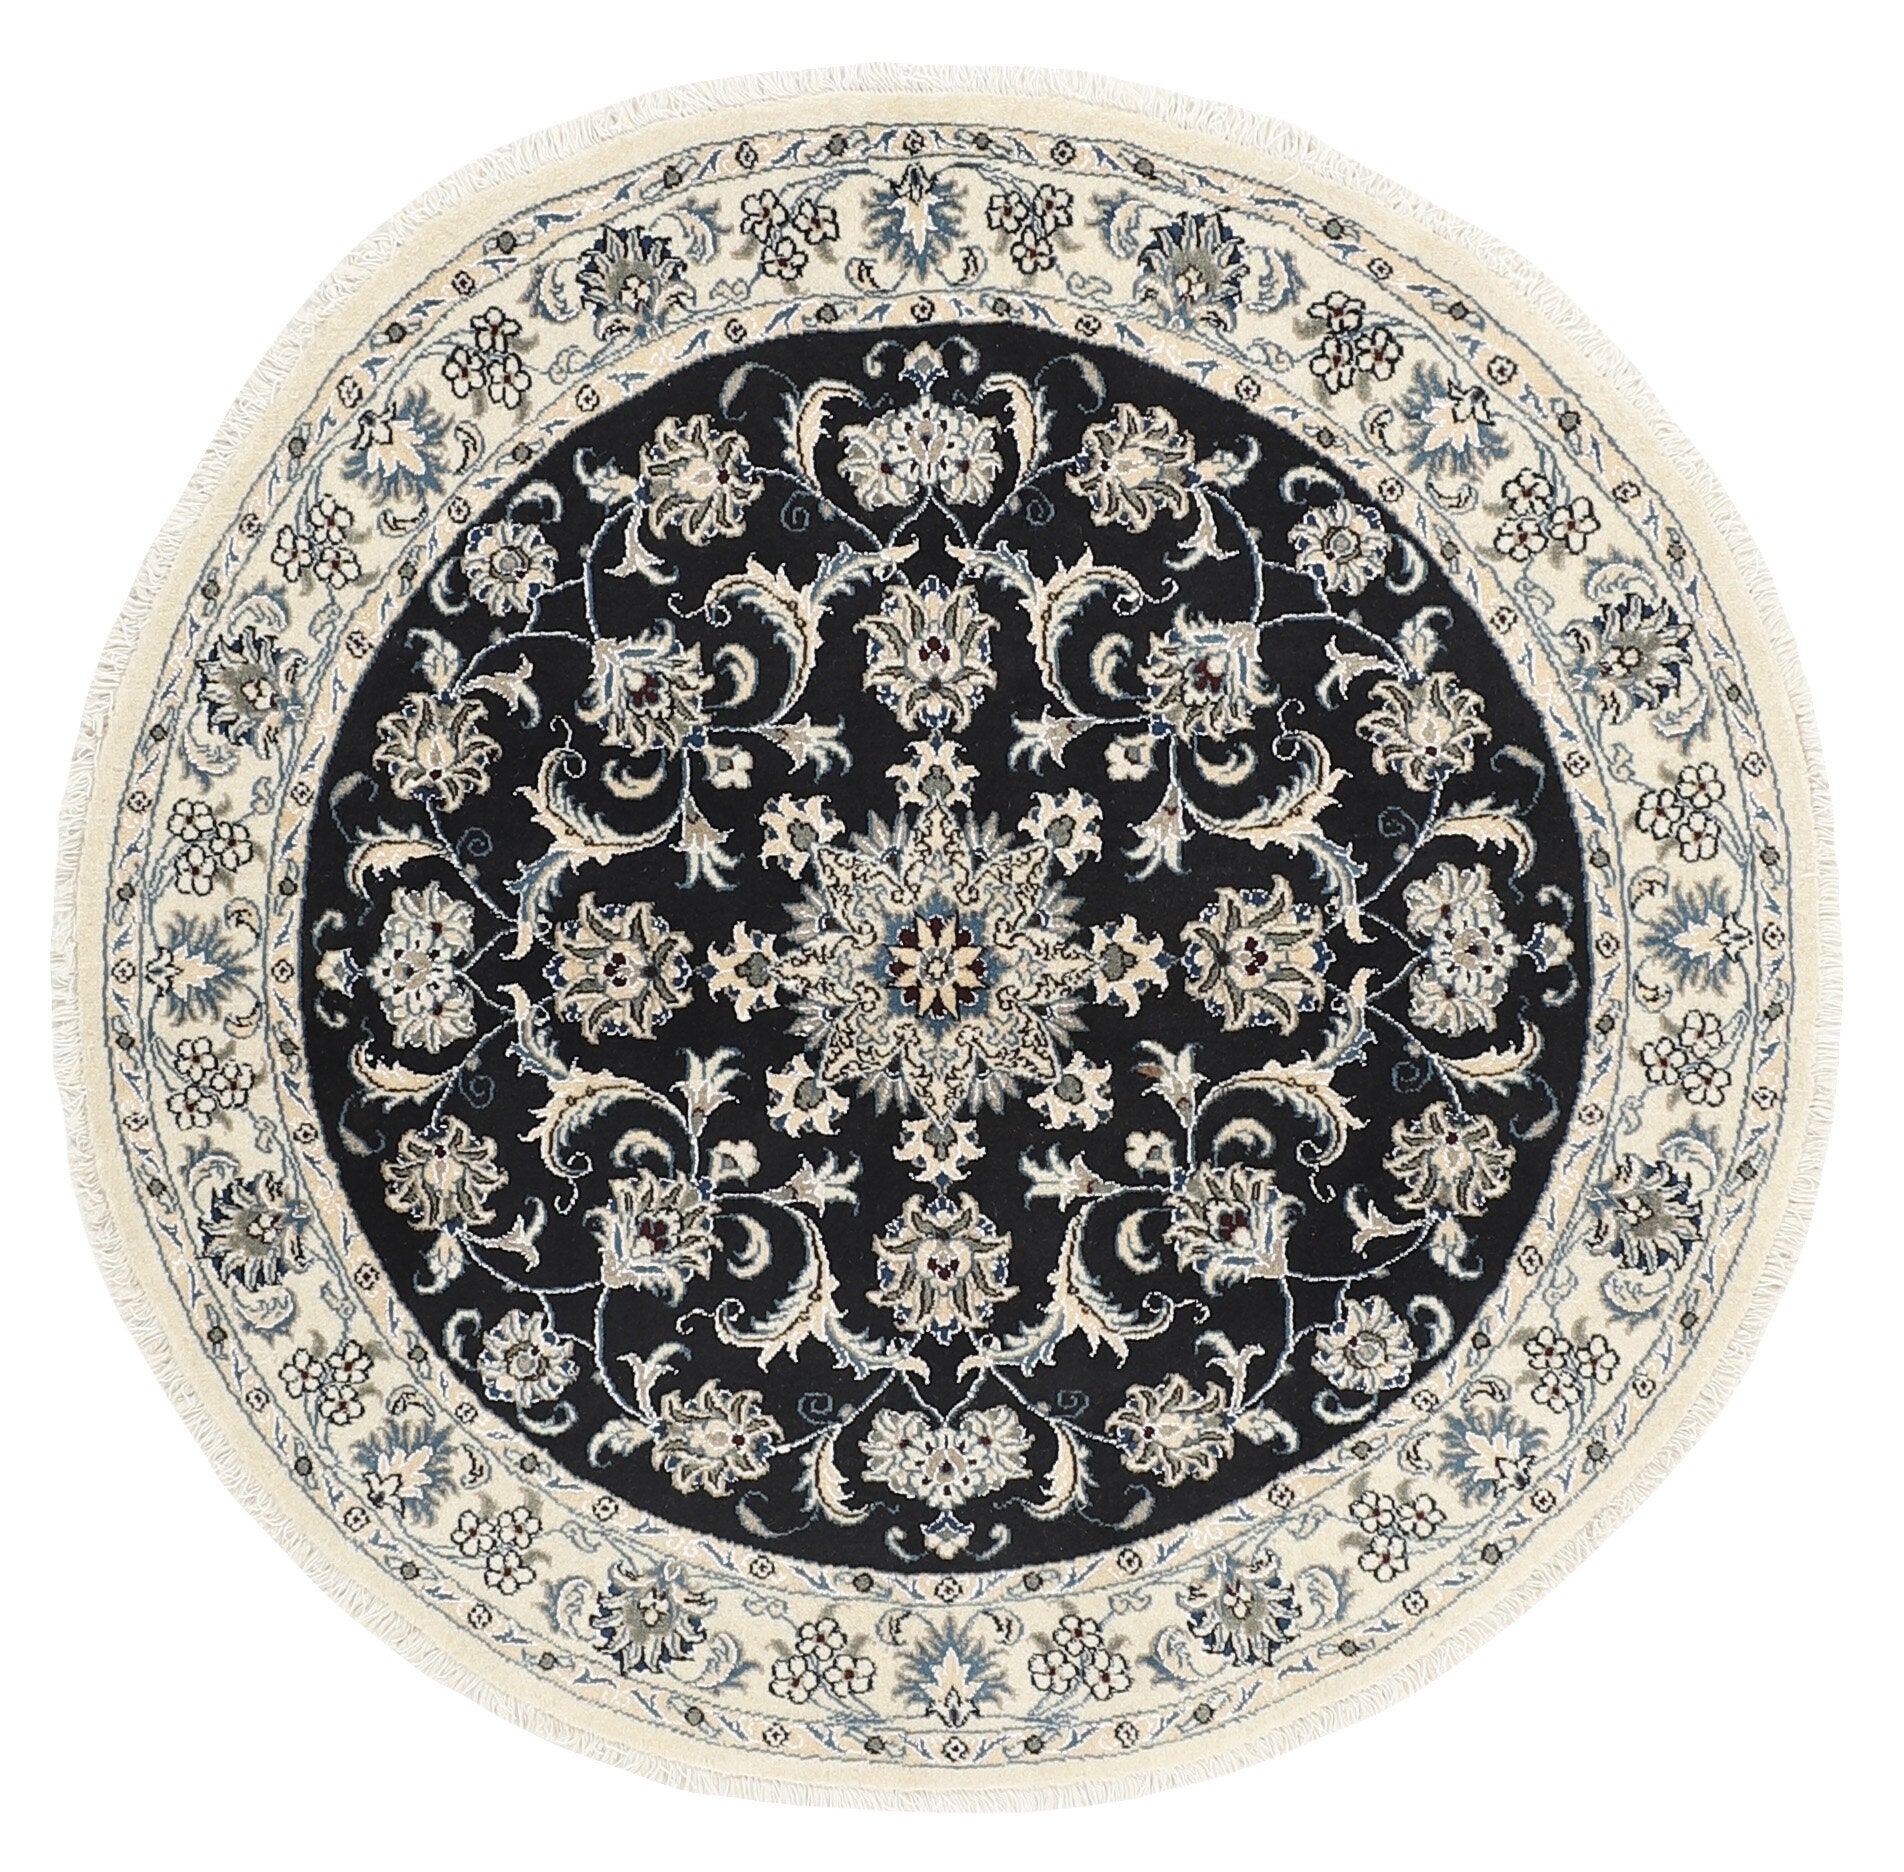 Authentic persian circle rug with a traditional floral design in cream and black